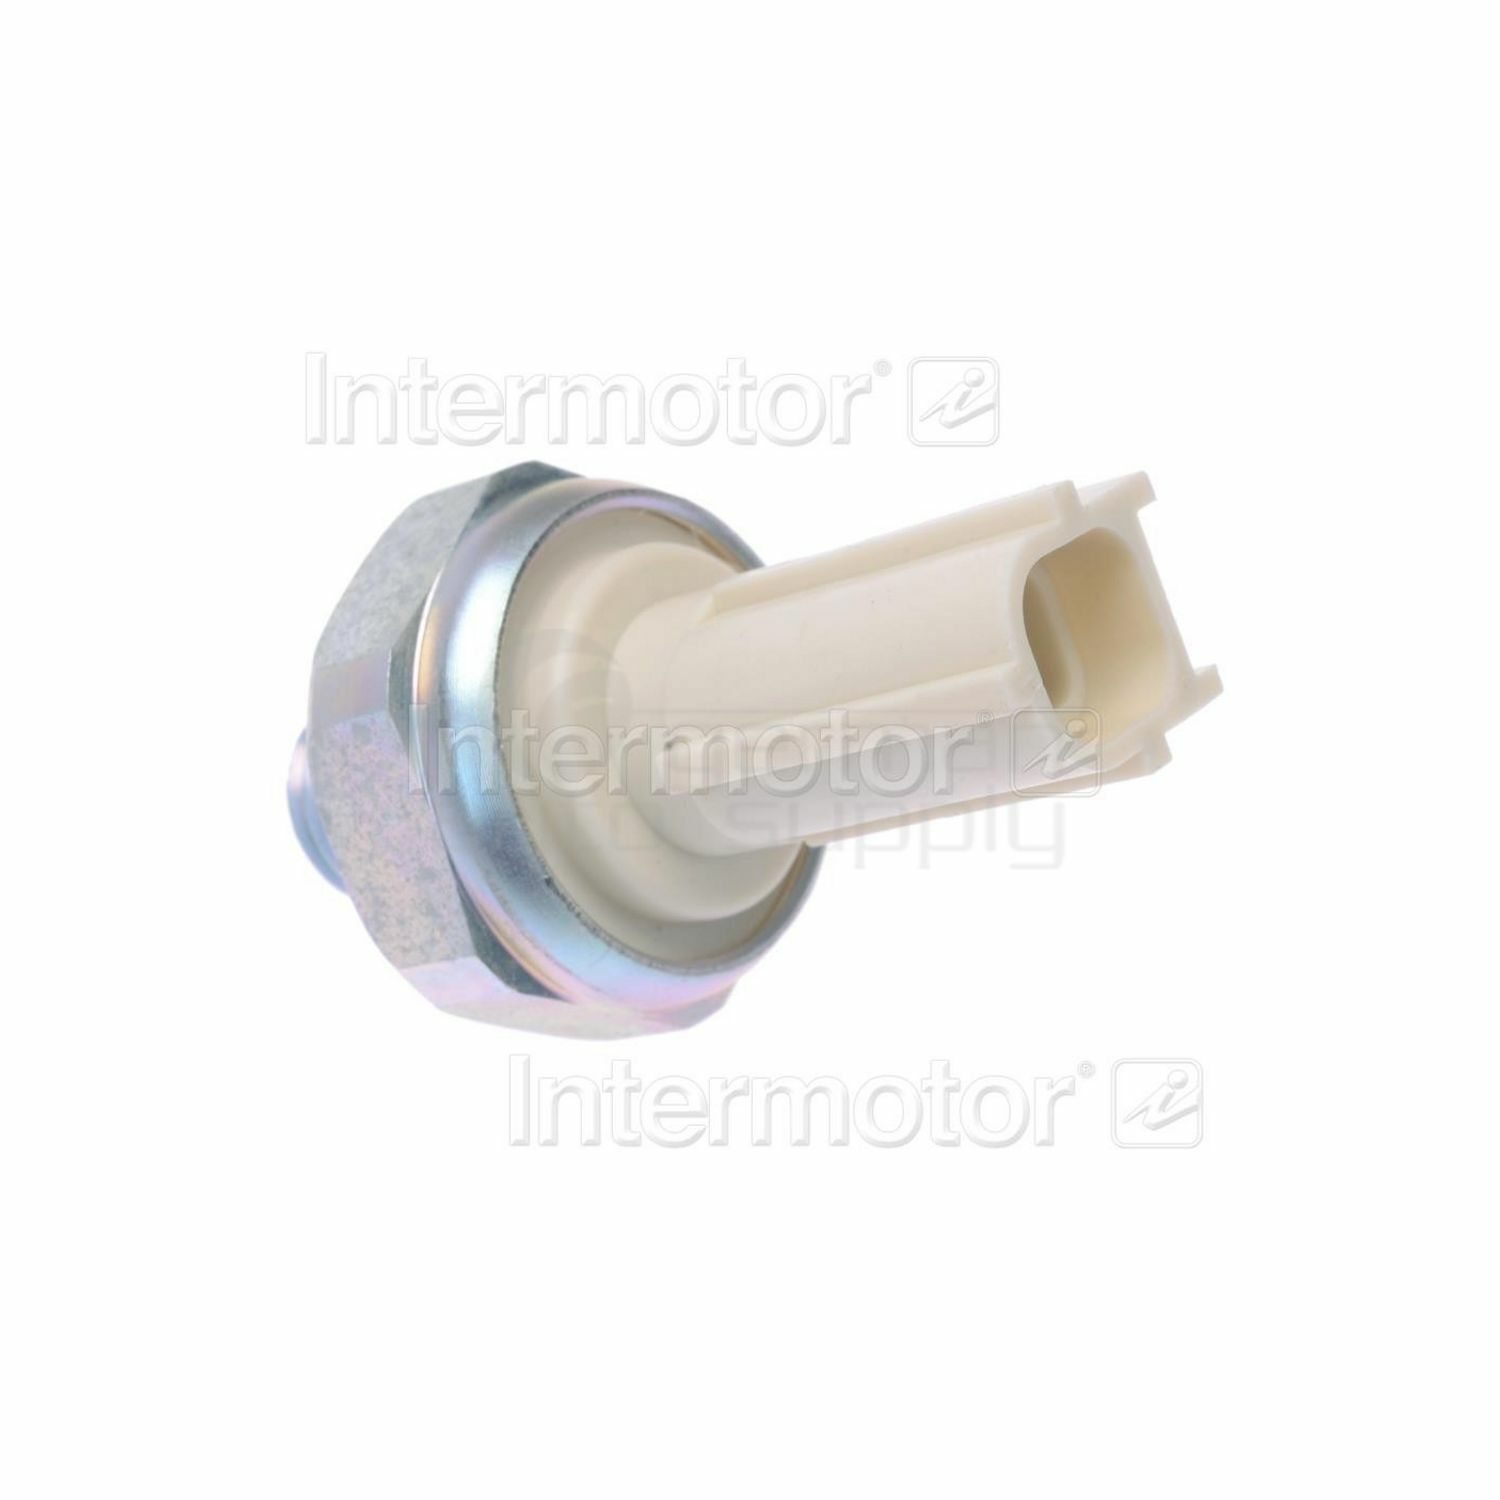 Ramco Automotive Engine Oil Pressure Switch Standard Motor Products PS314 Compatible with Wells PS404 RA-OPS1053 